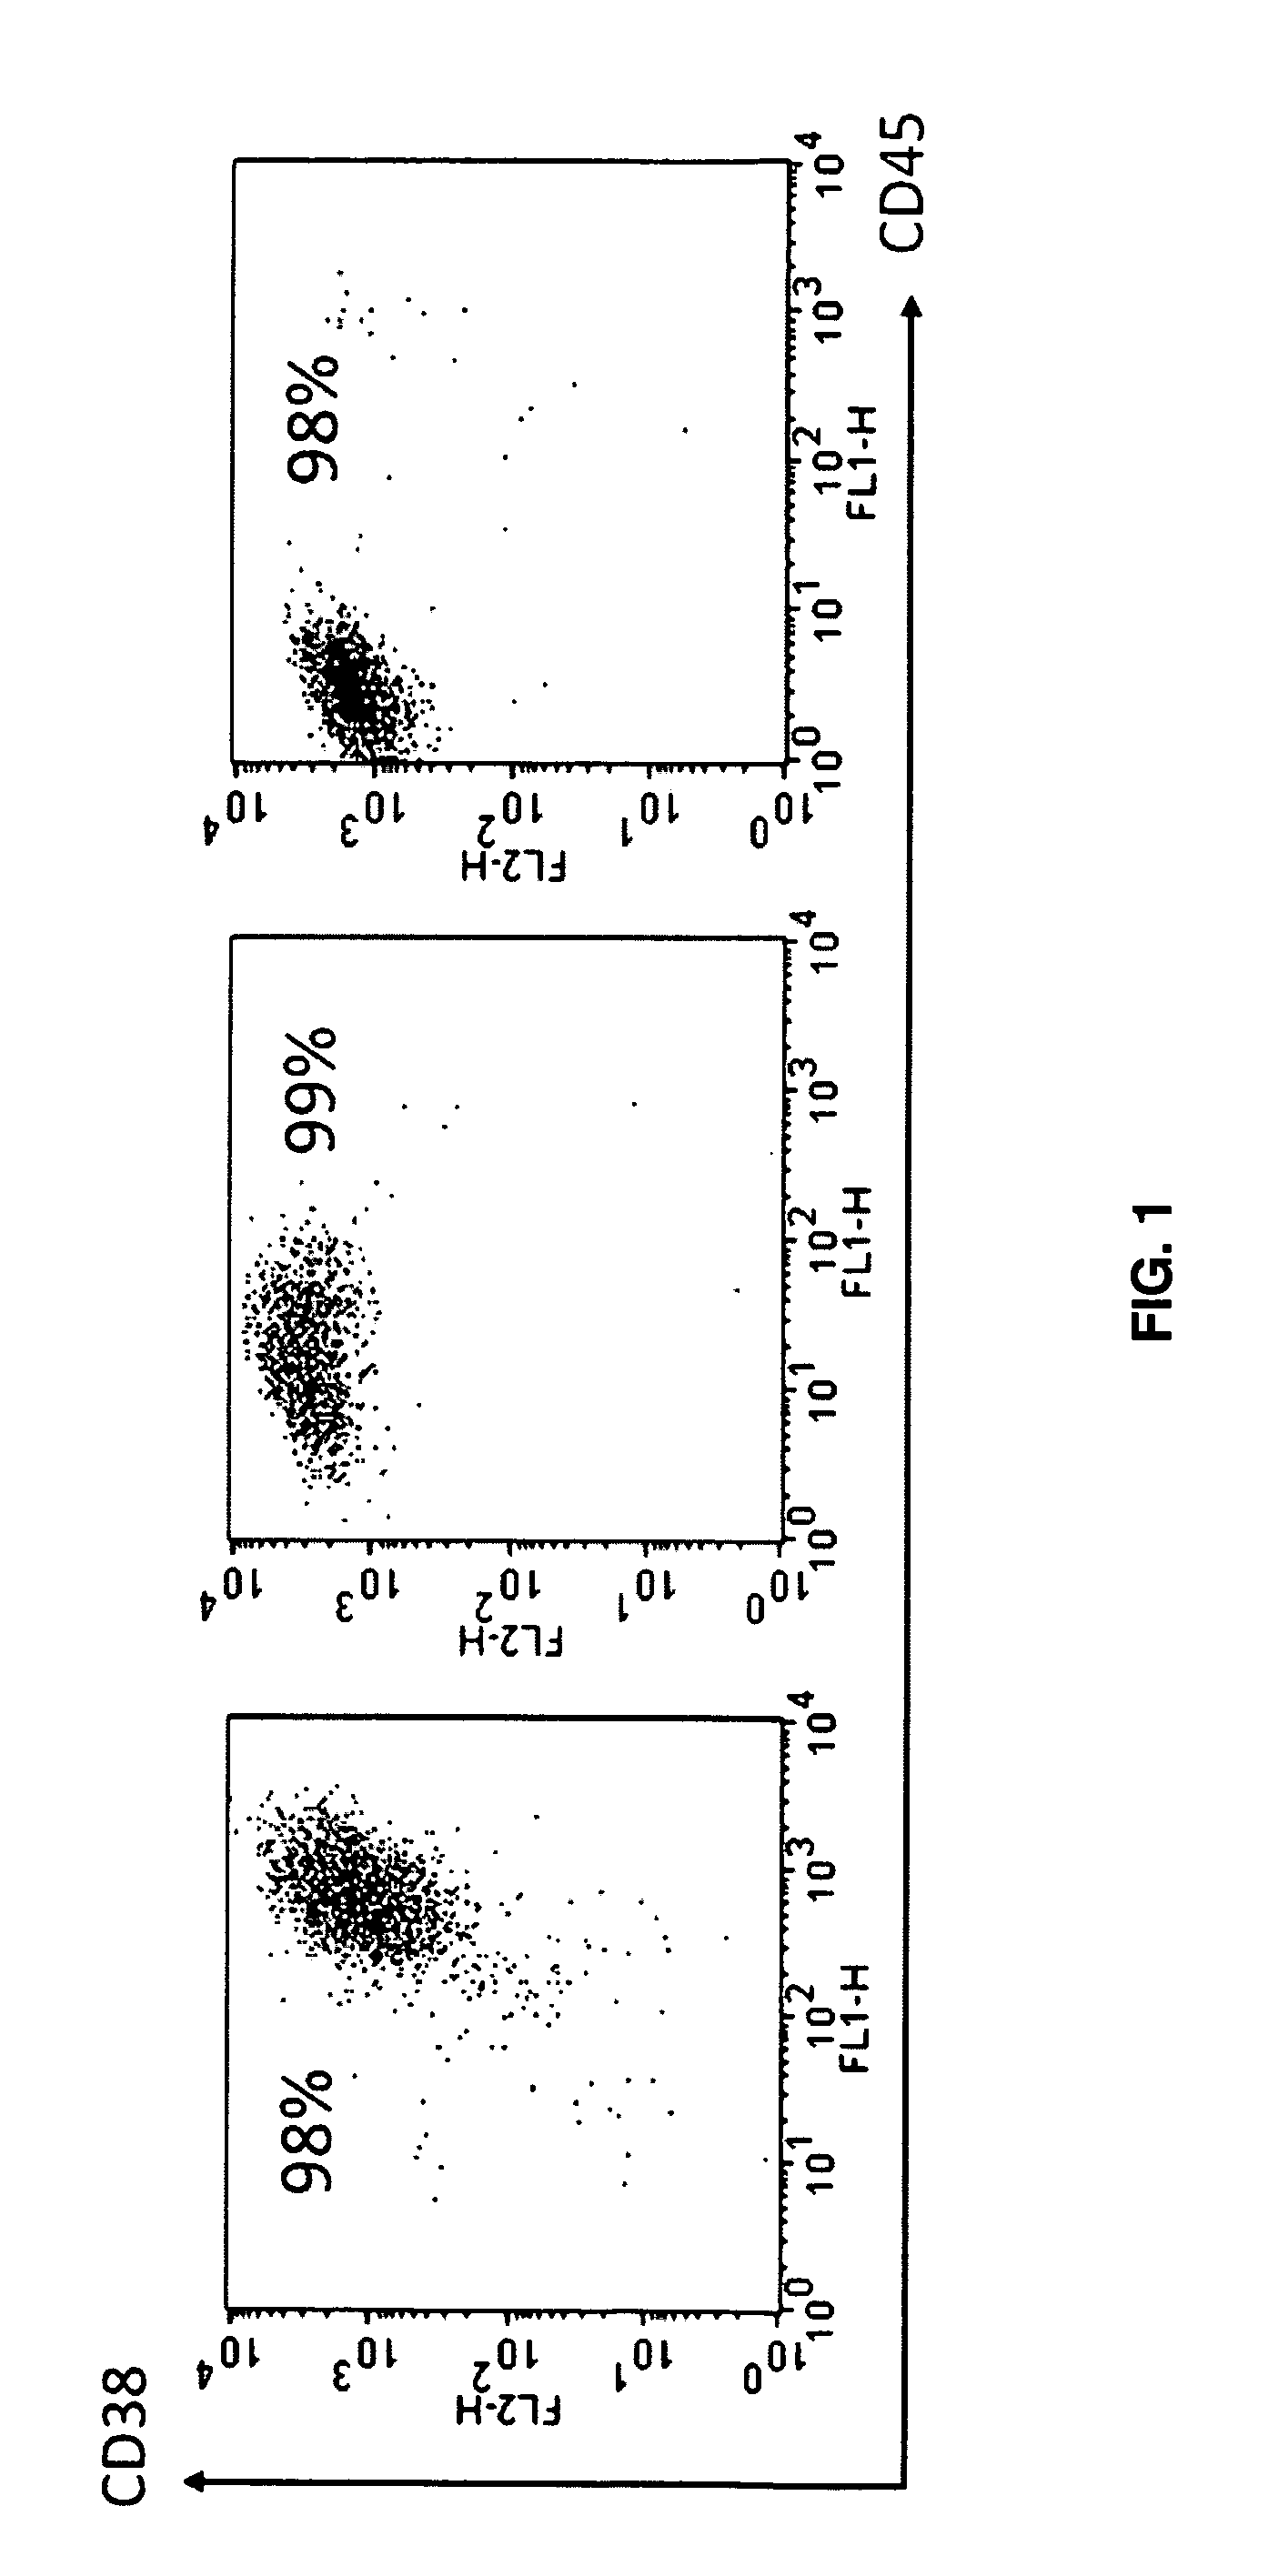 Genes associated with post relapse survival and uses thereof